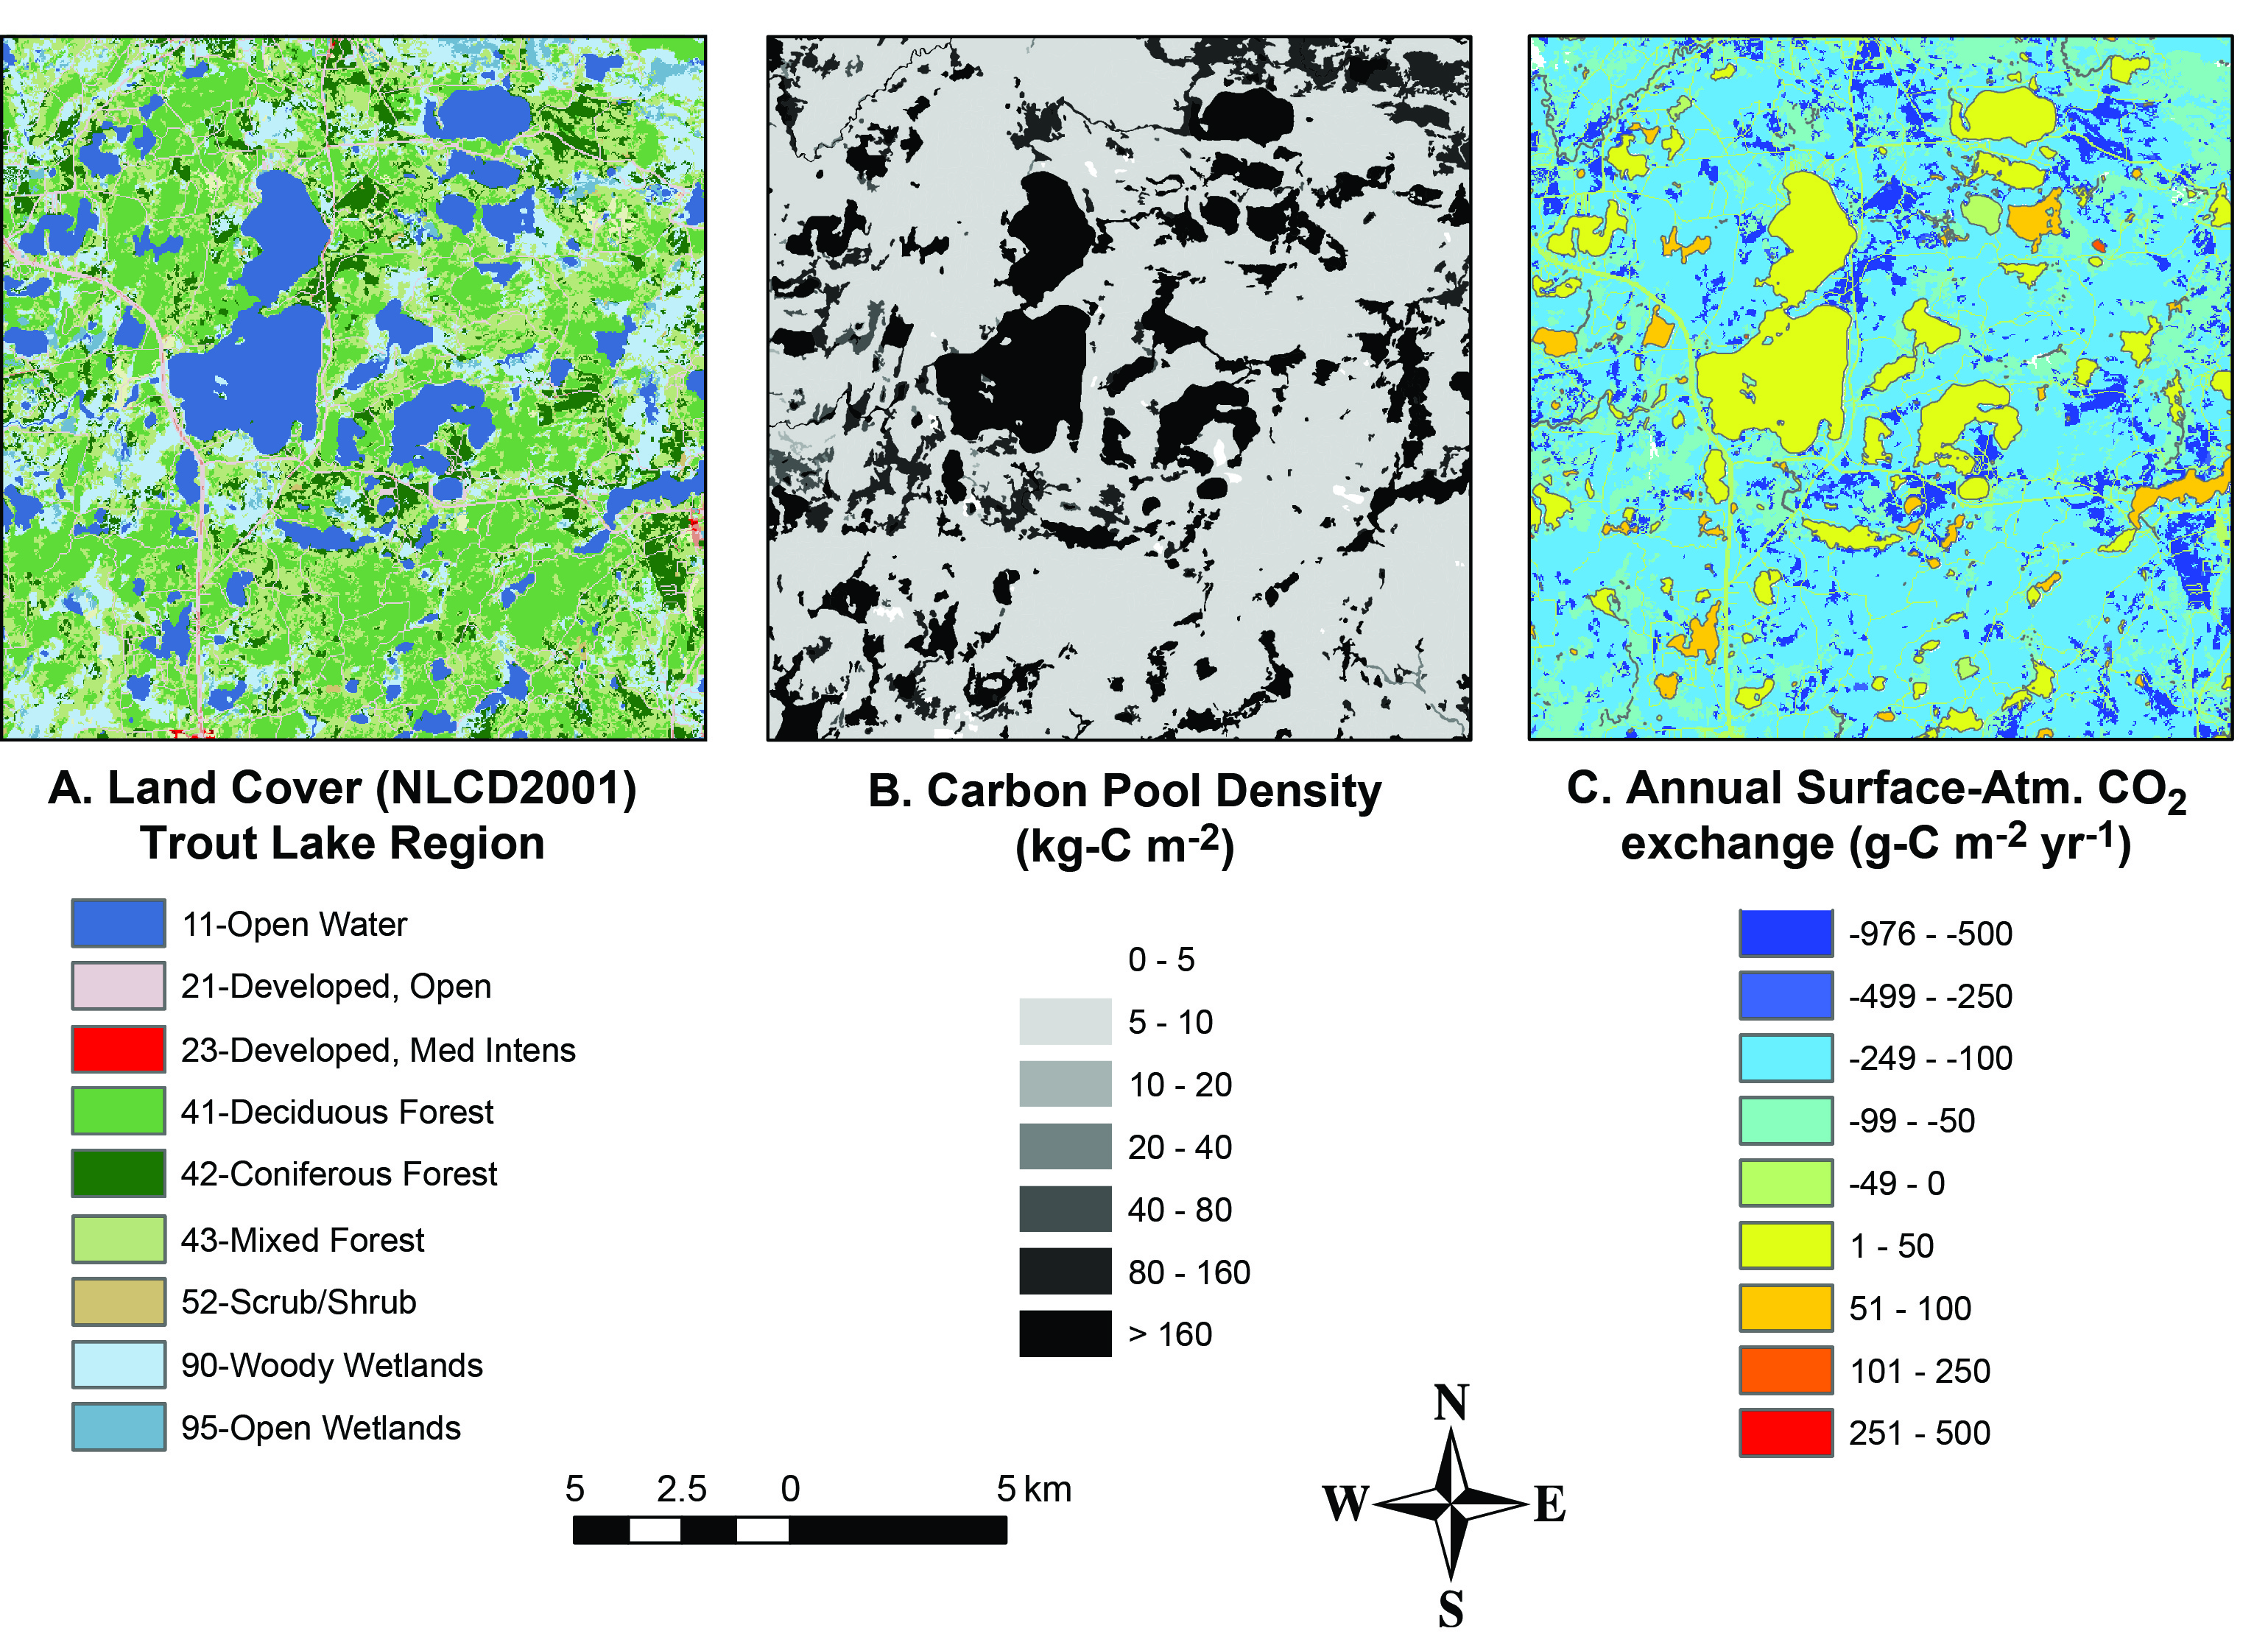 three maps with land cover, carbon pool density, and CO2 exchange